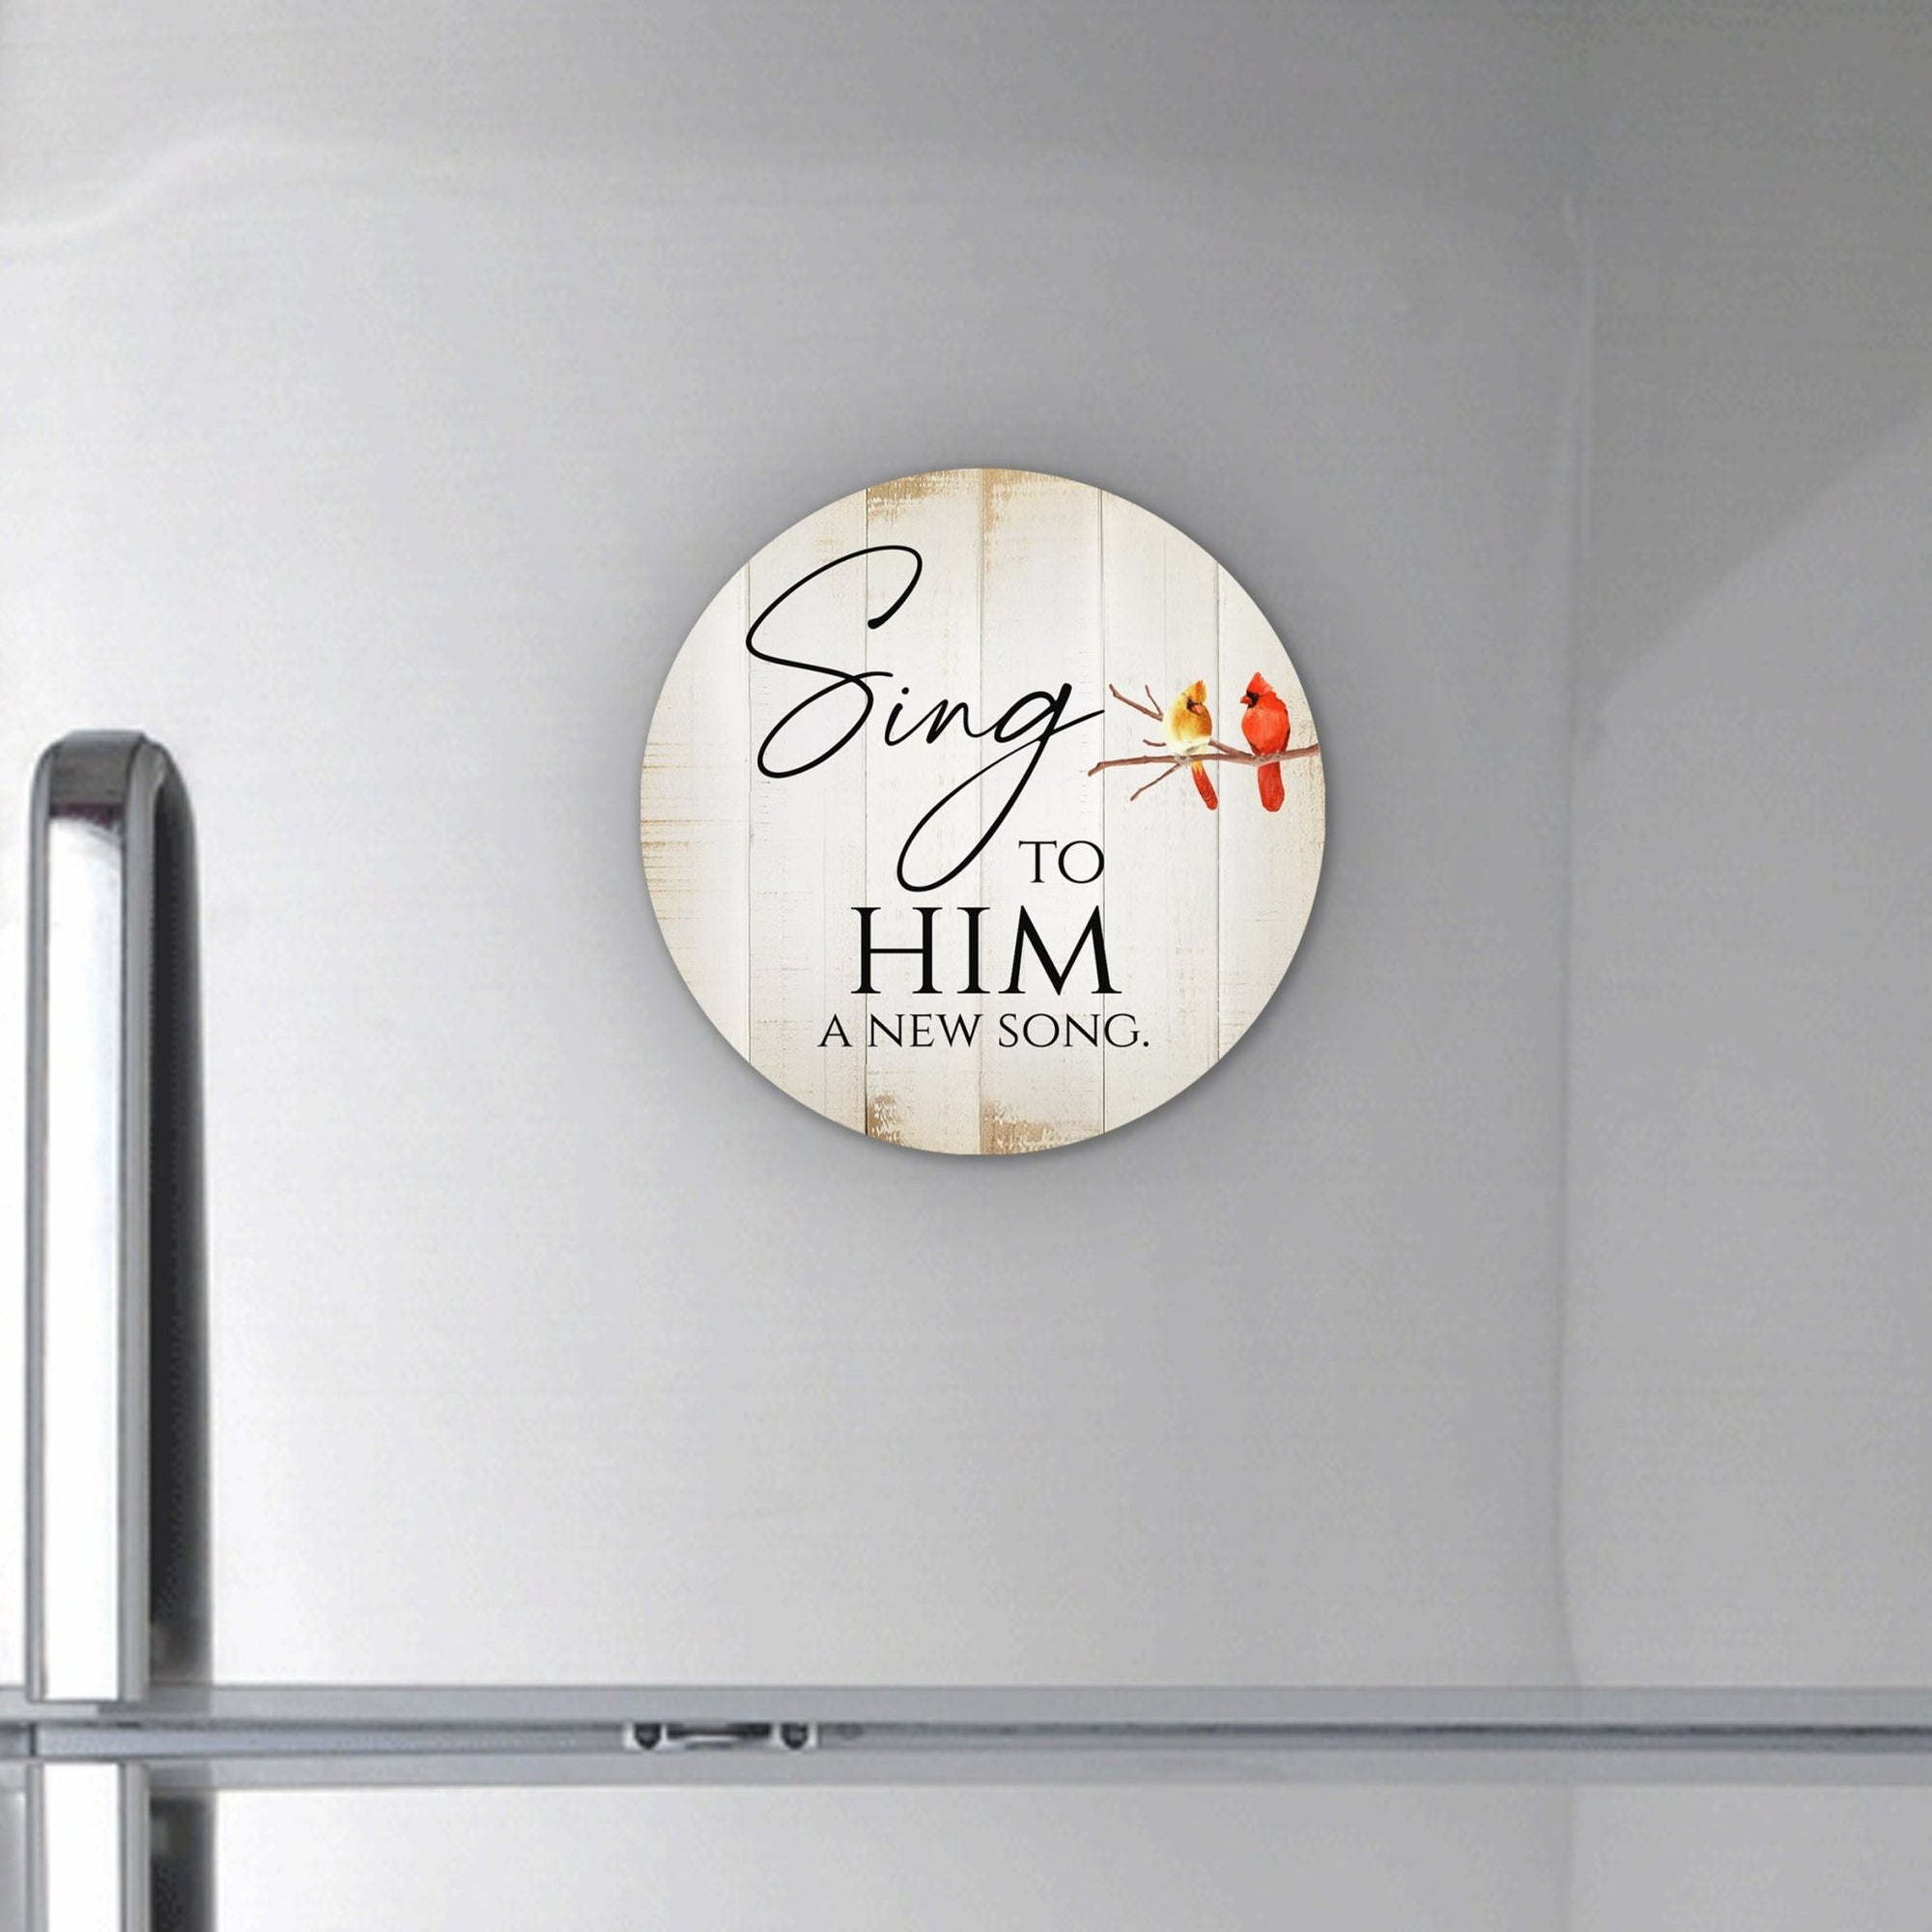 Vintage-Inspired Cardinal Wooden Magnet Printed With Everyday Inspirational Verses Gift Ideas - Sing To Him - LifeSong Milestones